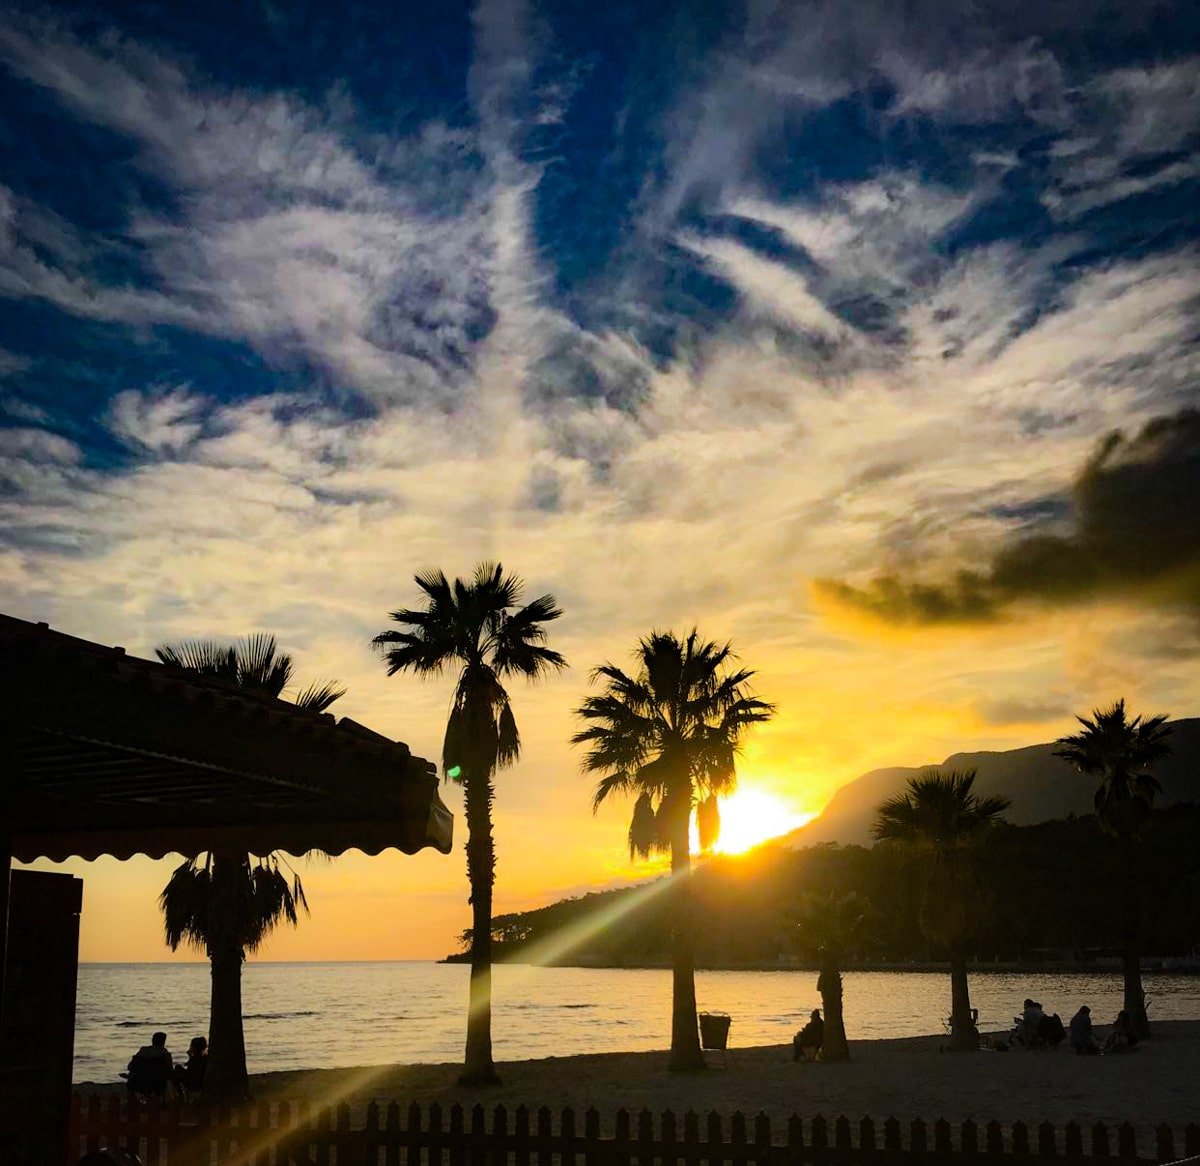 A sunset over Akyaka with palm trees.